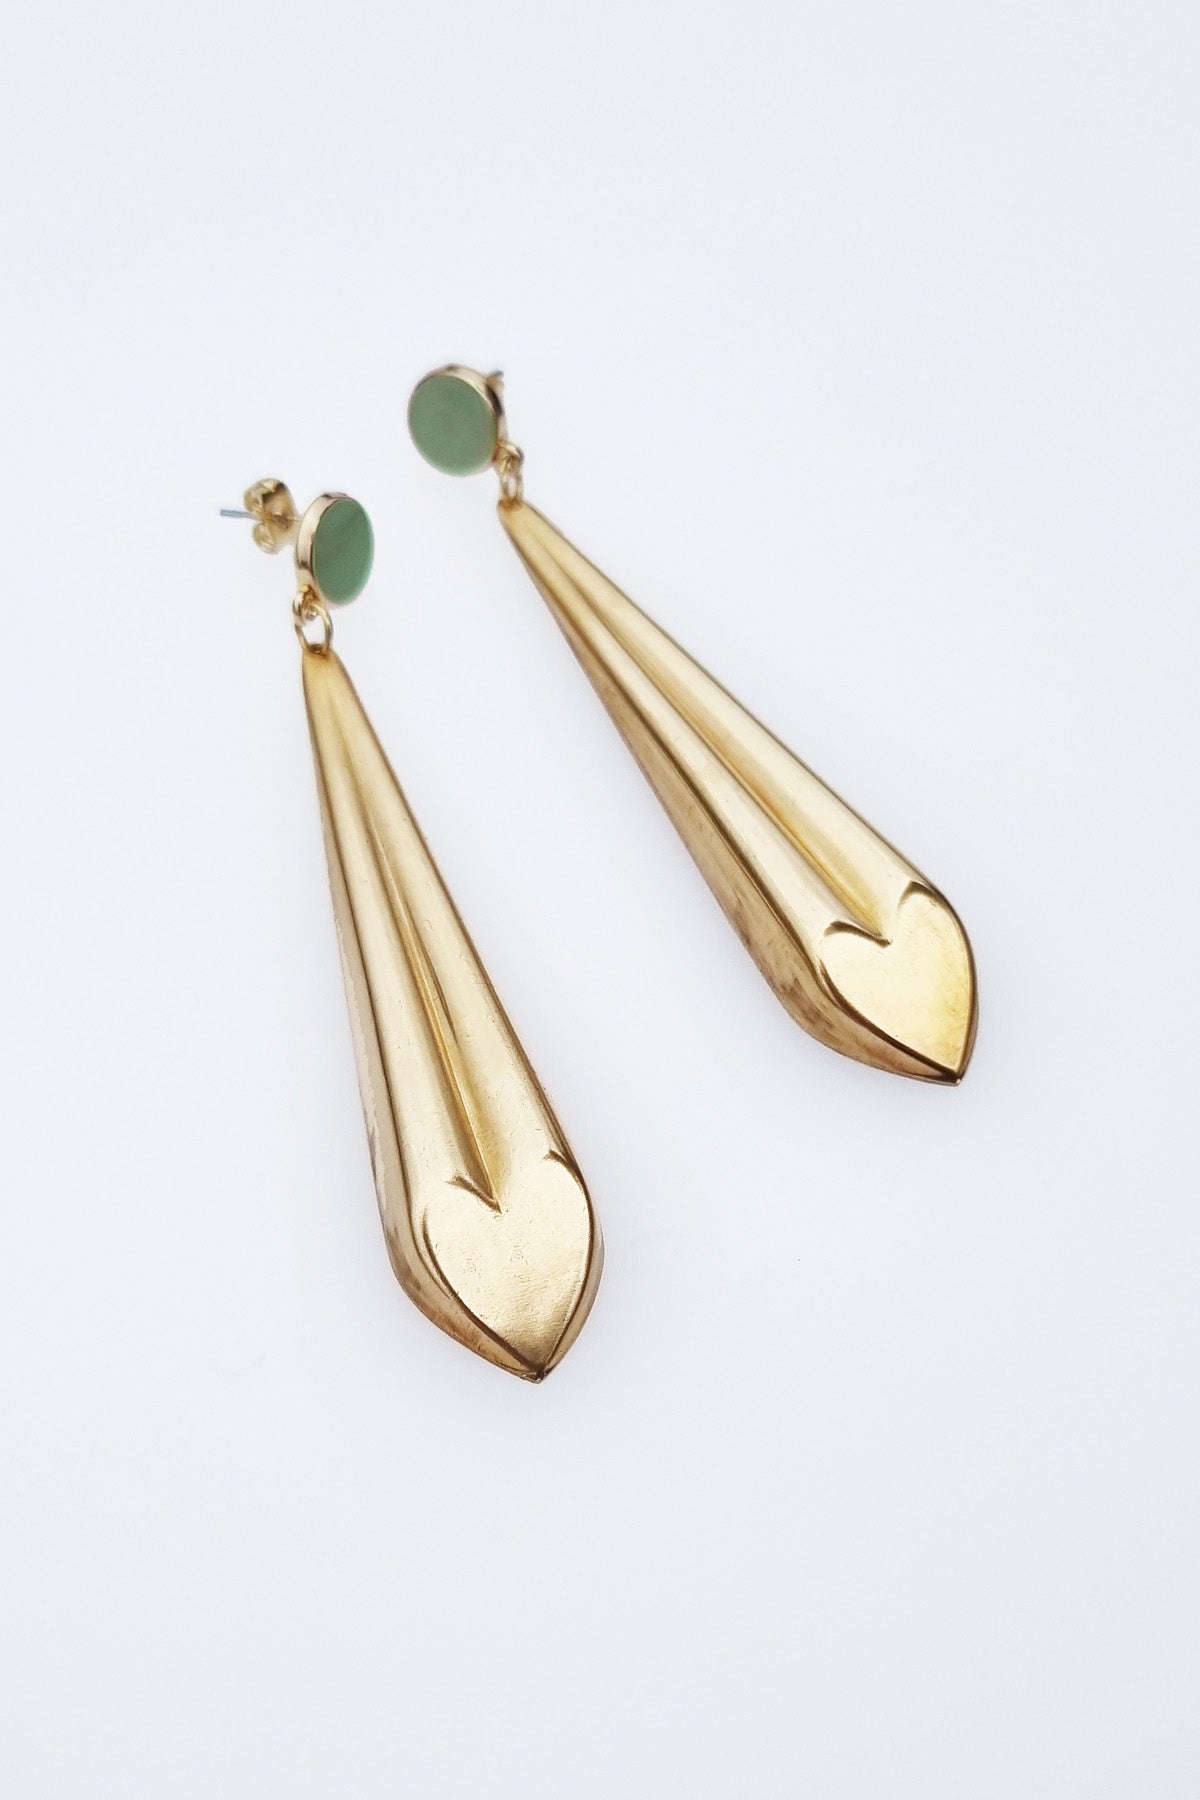 A pair of statement dangle earrings with a stud top sit against a white background. They feature a sage enamel stud and a long brass drop with a heart shape at the bottom.